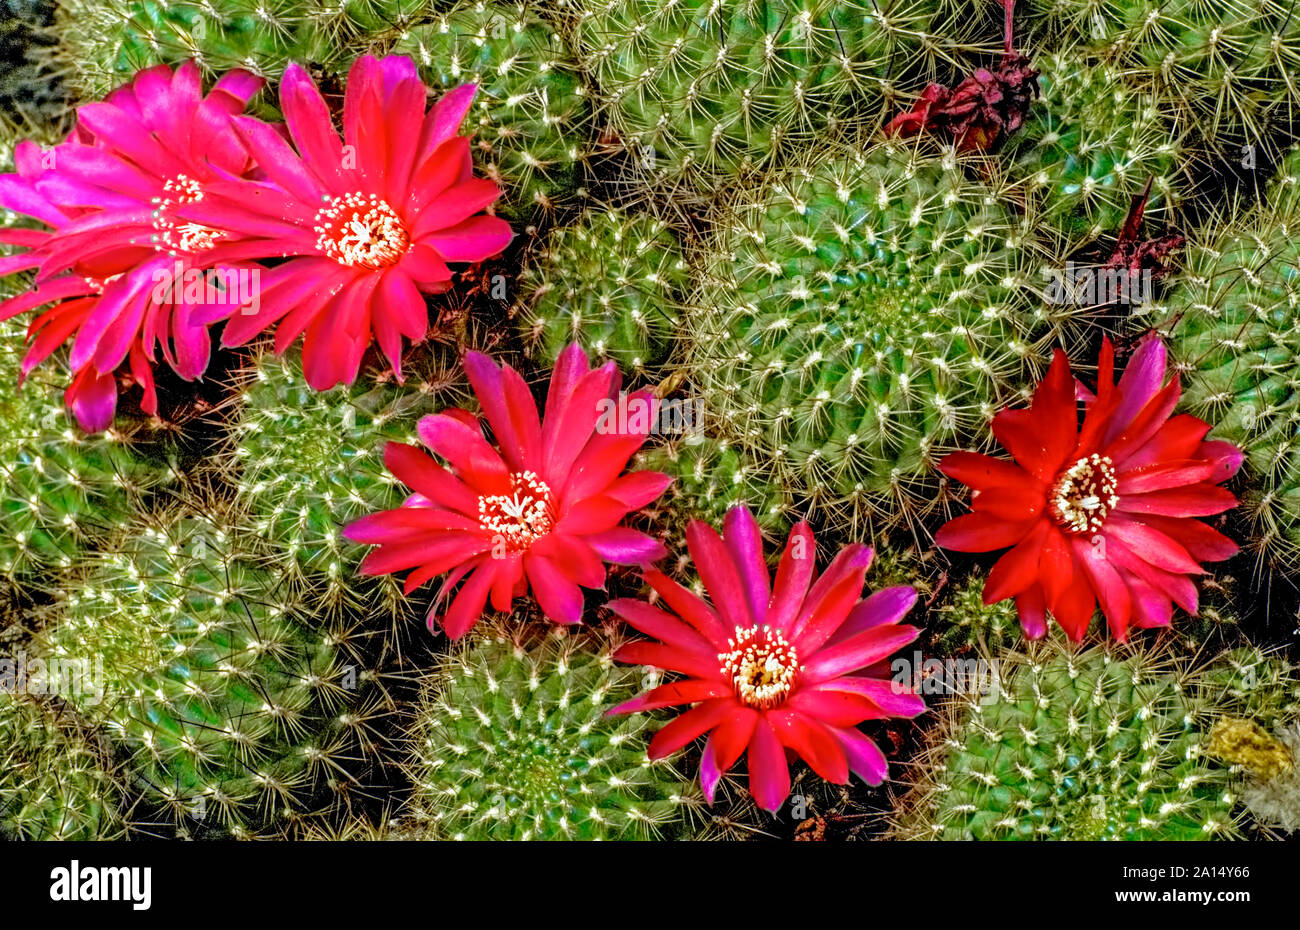 Cactus,Rebutia canigueralli,spiralled ,ribs,tuberculate,purple,colour,flower,origin,Argentina,cultivated,in,Kalimpong,India, Stock Photo